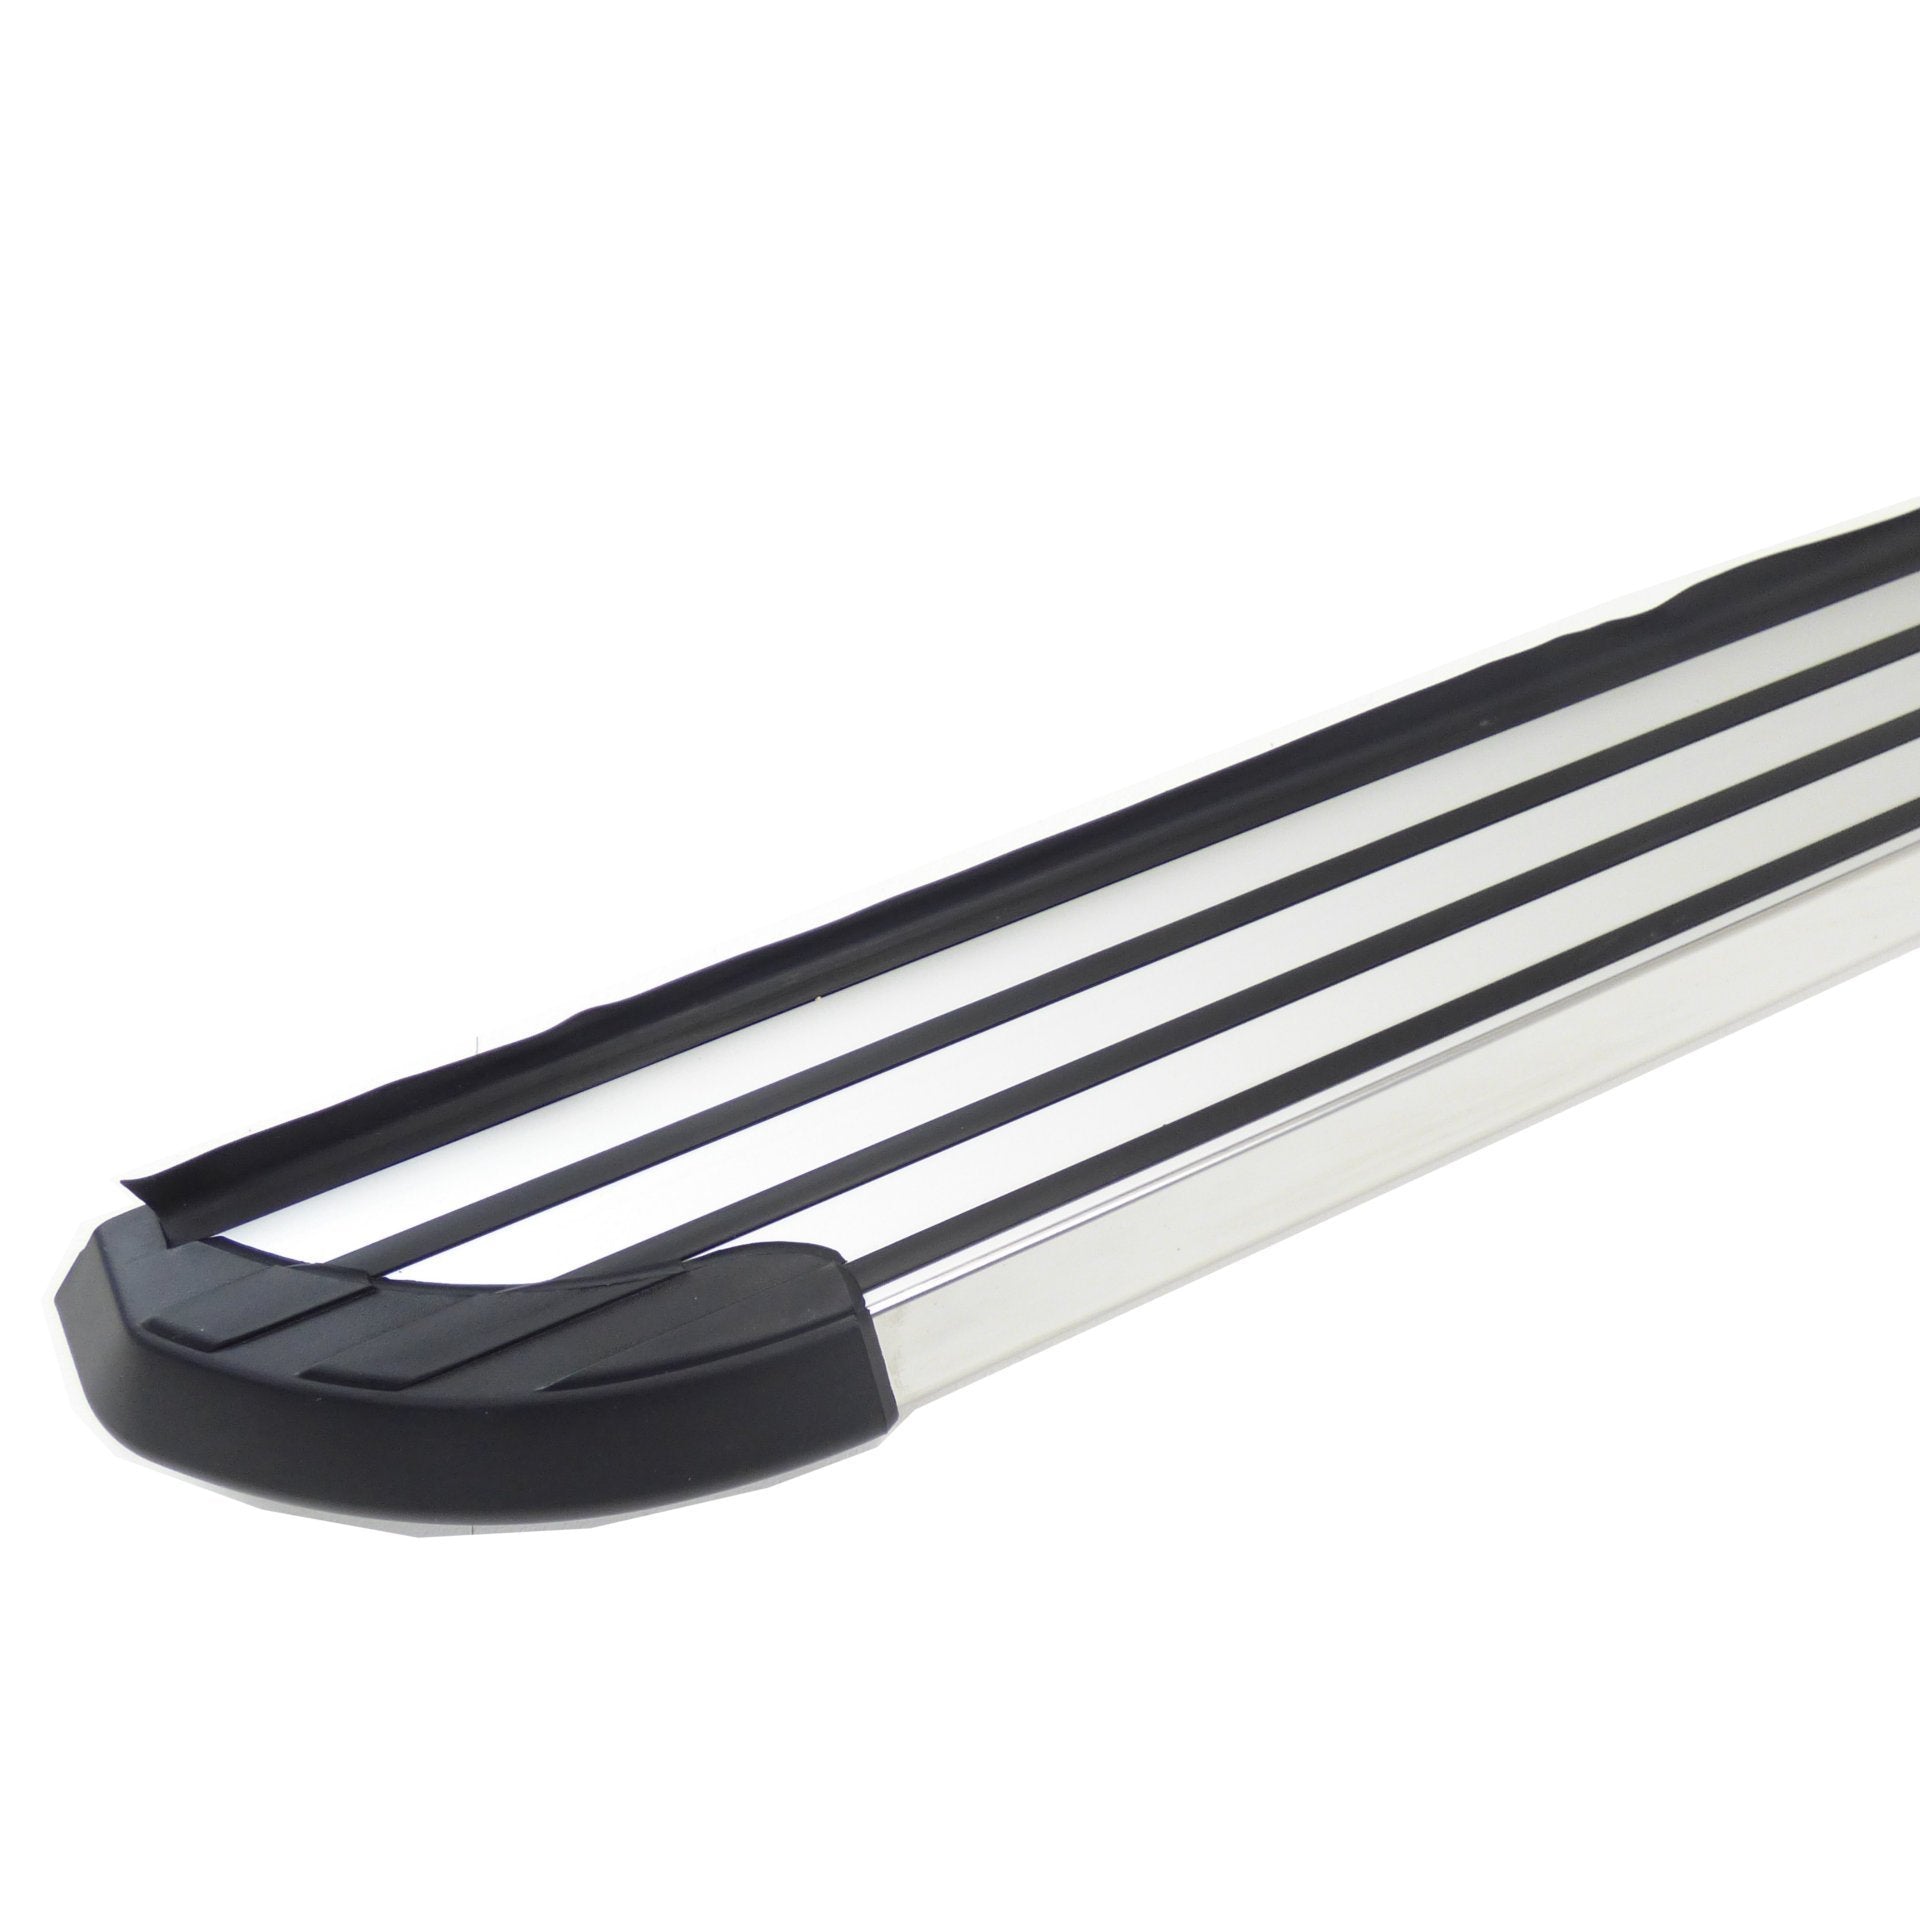 Stingray Side Steps Running Boards for BMW X4 2014+ (inc. M Sport Models) -  - sold by Direct4x4